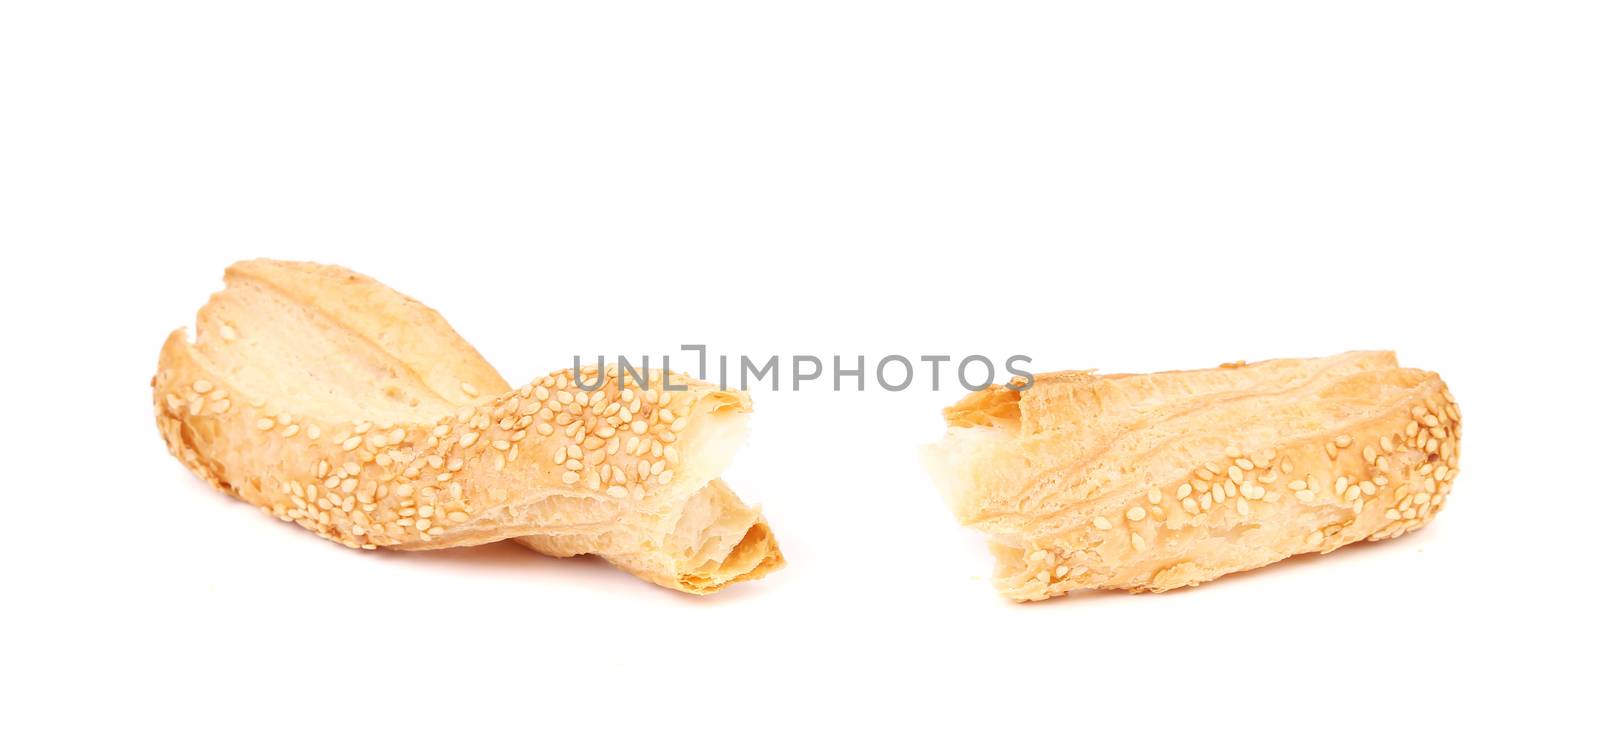 Cheese cracker with sesame. by indigolotos